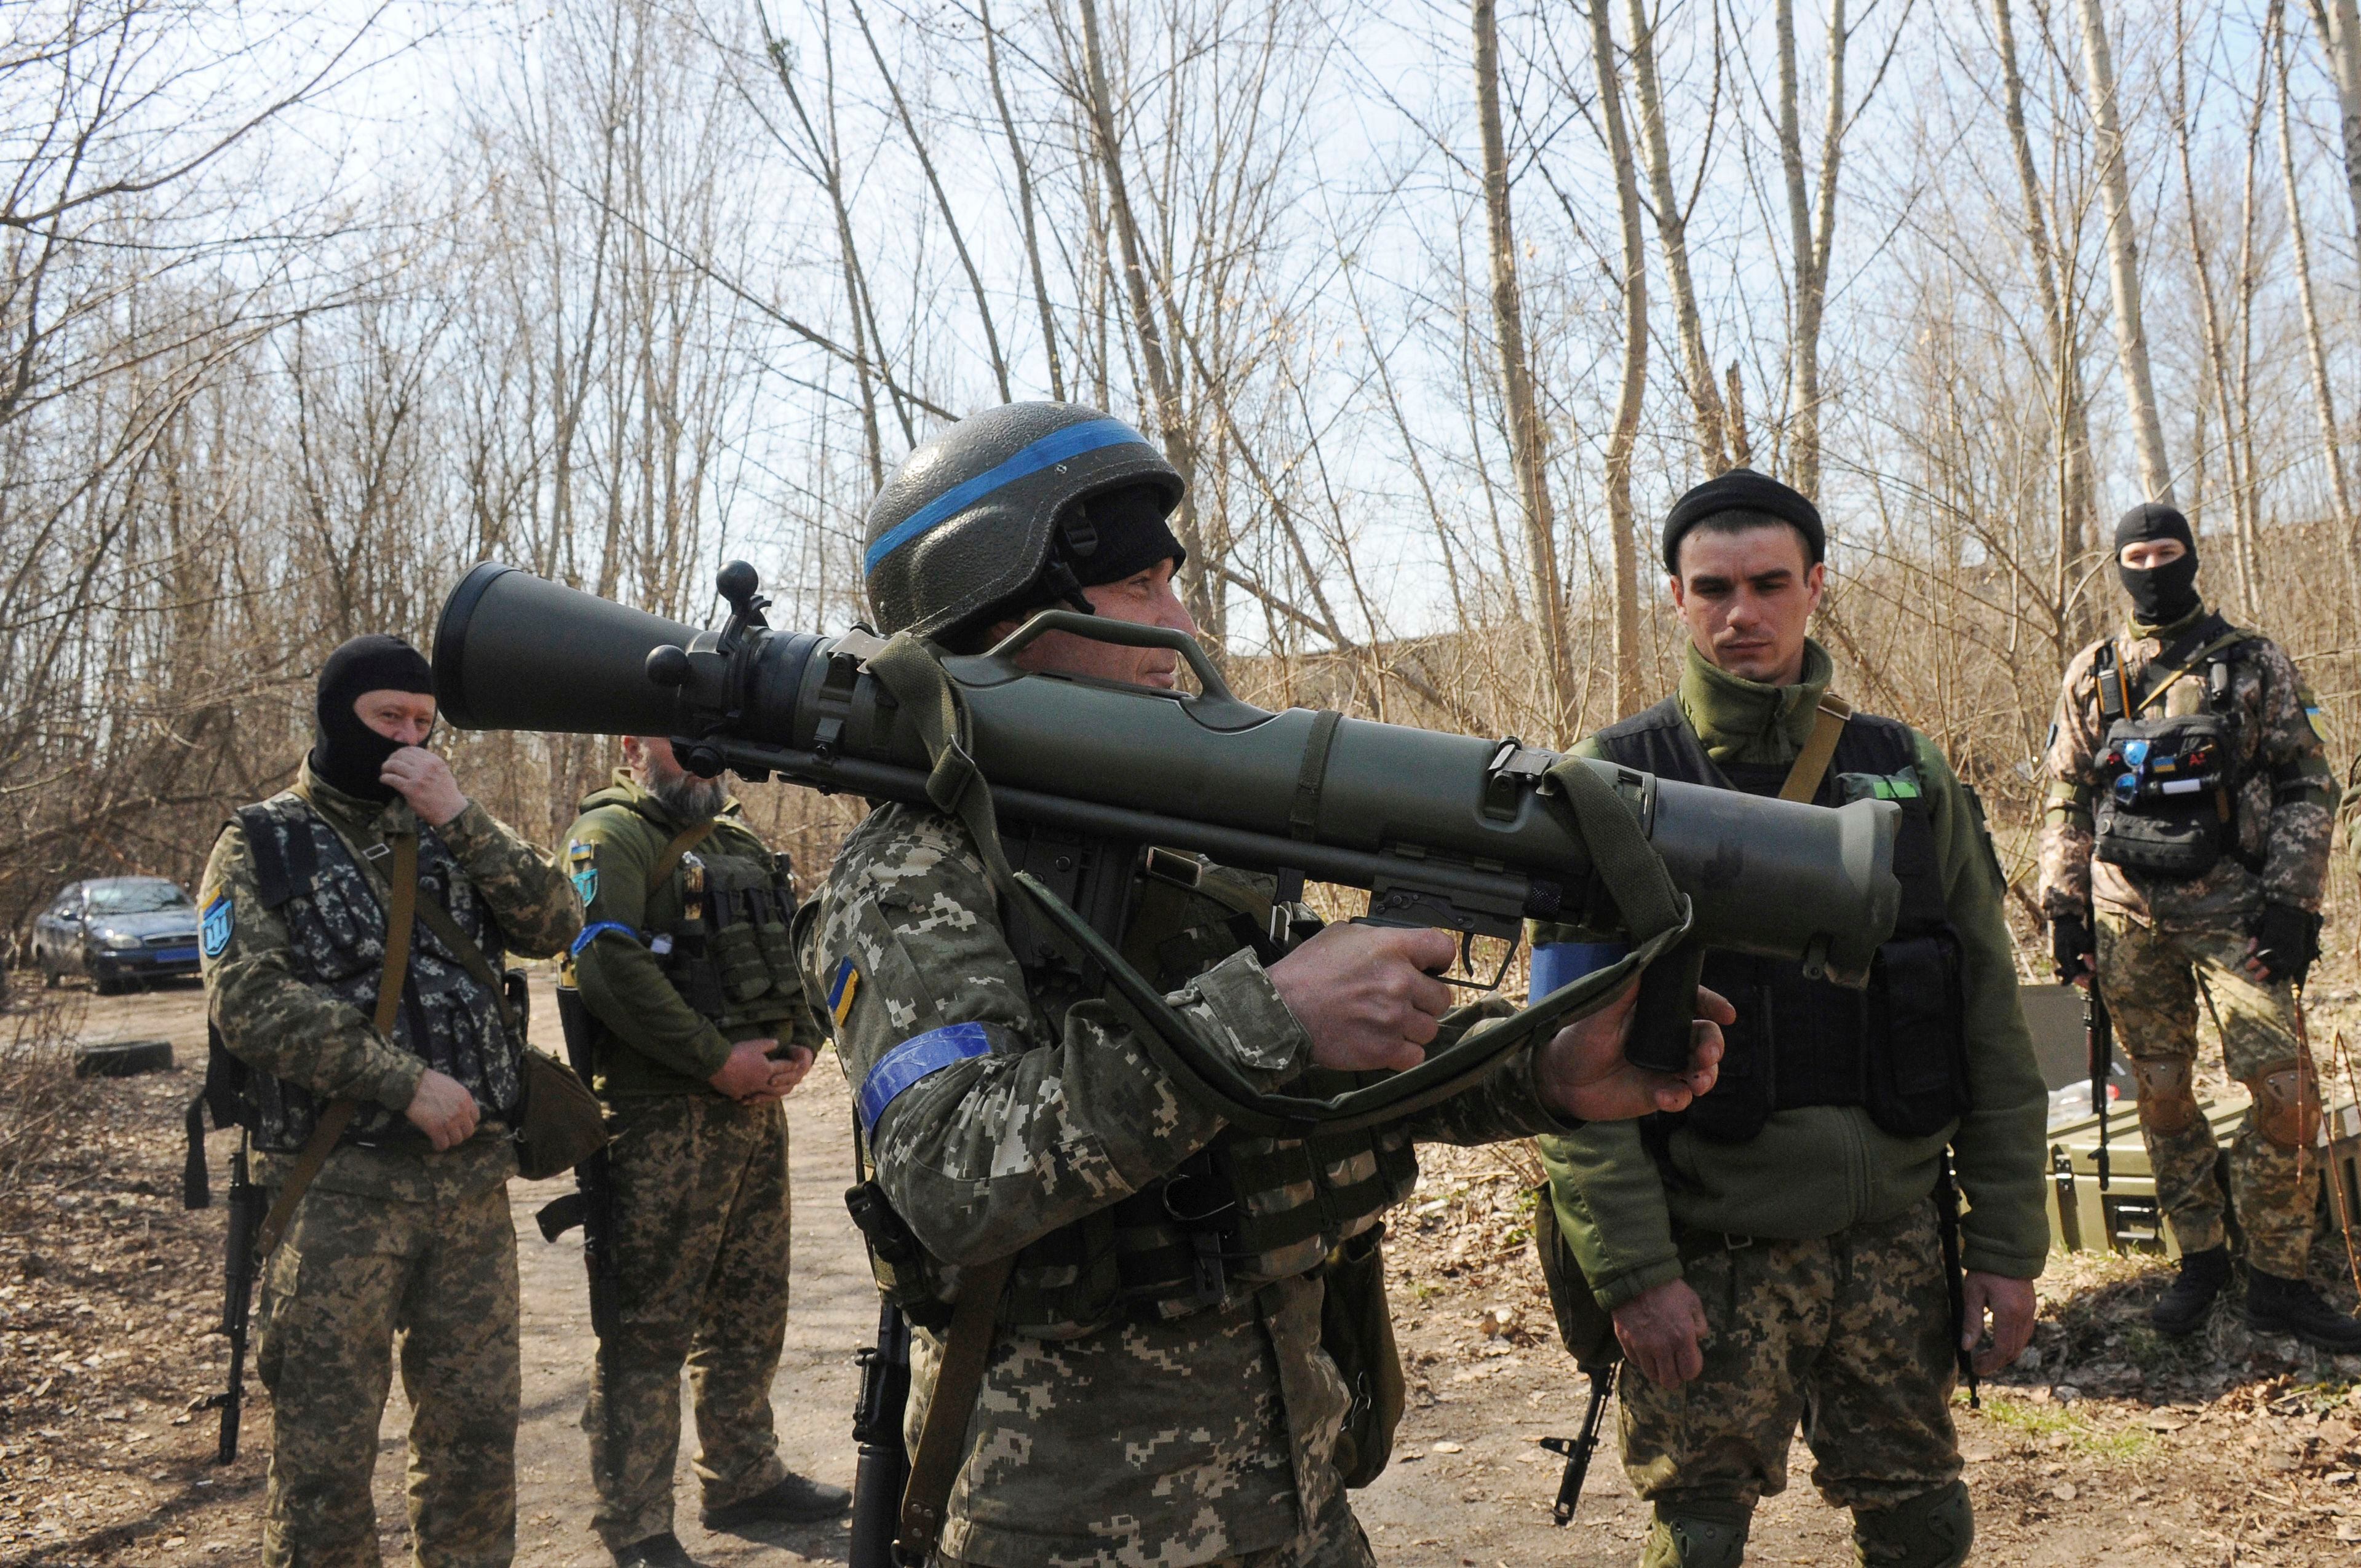 Ukrainian servicemen study a Sweden shoulder-launched weapon system Carl Gustaf M4 during a training session on the near Kharkiv, Ukraine, April 7, 2022. (AP Photo/Andrew Marienko, File)